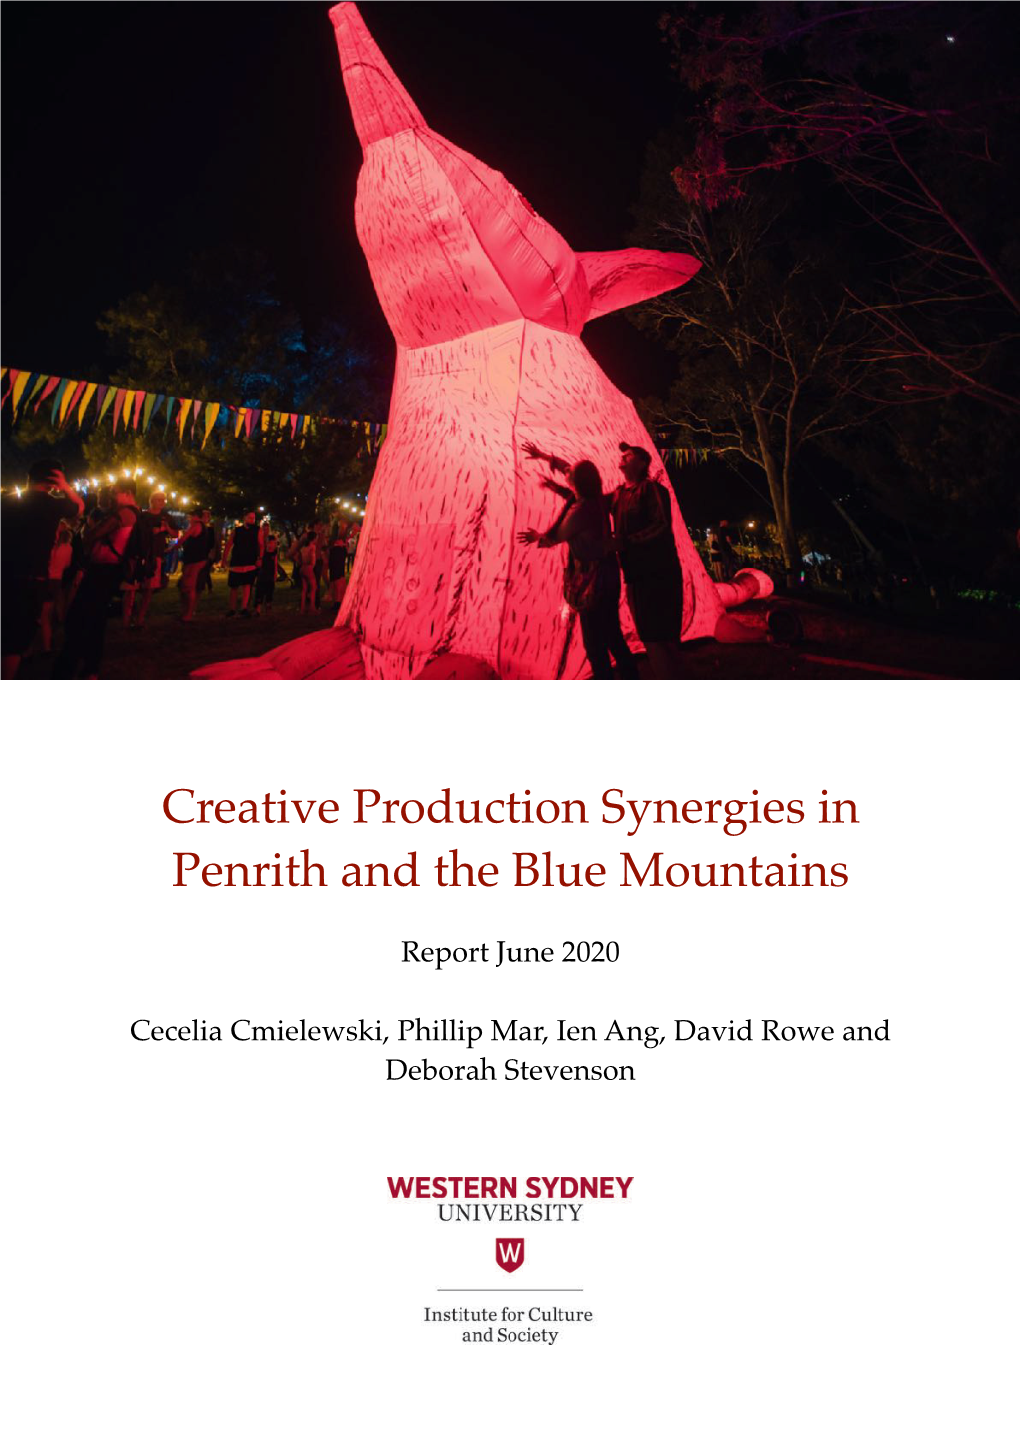 Creative Production Synergies in Penrith and the Blue Mountains